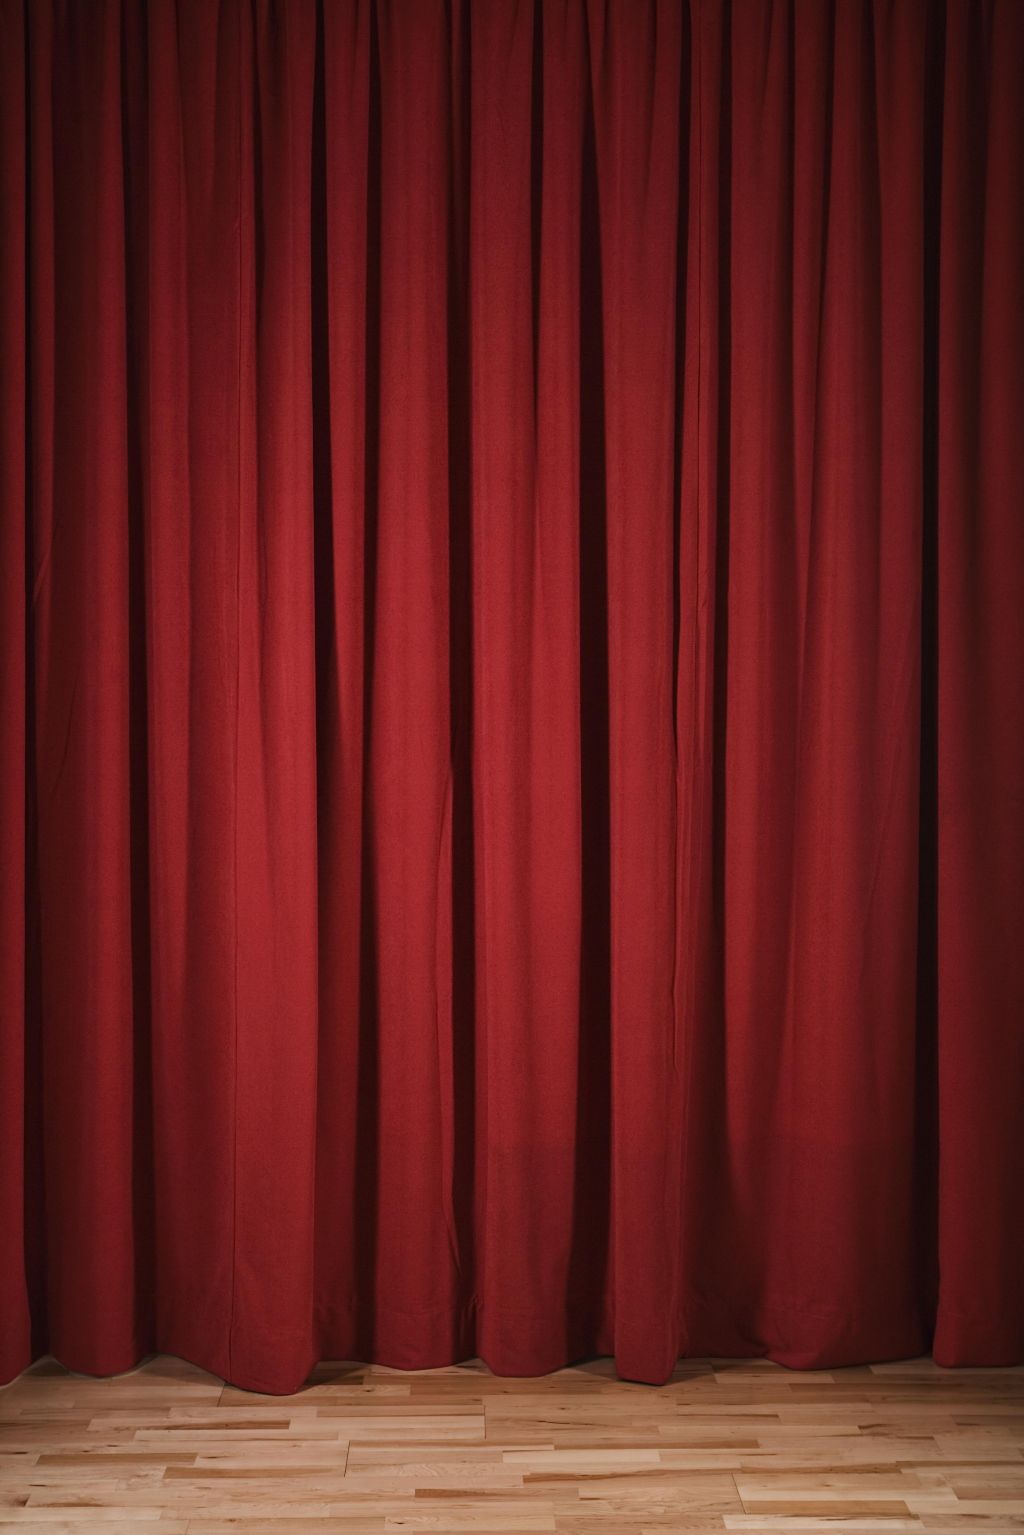 Red curtain on stage